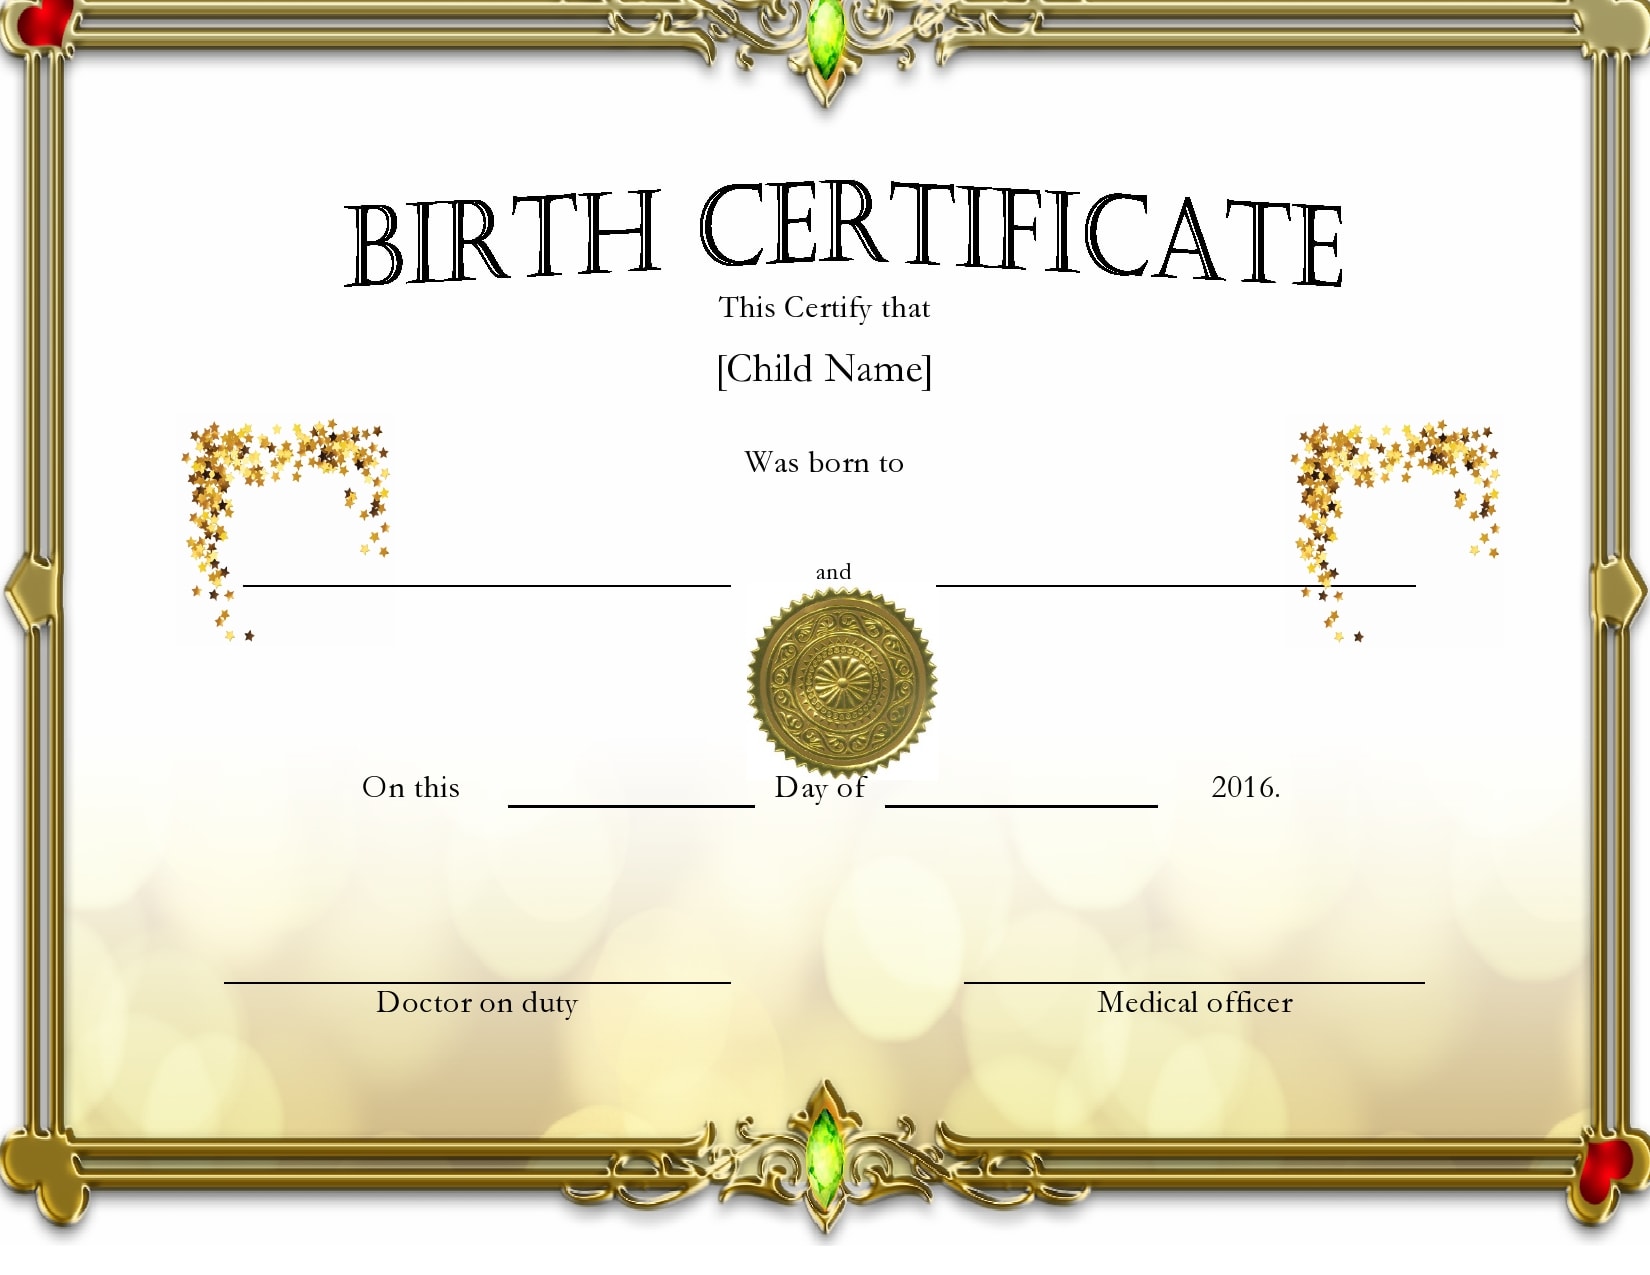 24 Blank Birth Certificate Templates (& Examples) - PrintableTemplates With Regard To Birth Certificate Template Uk